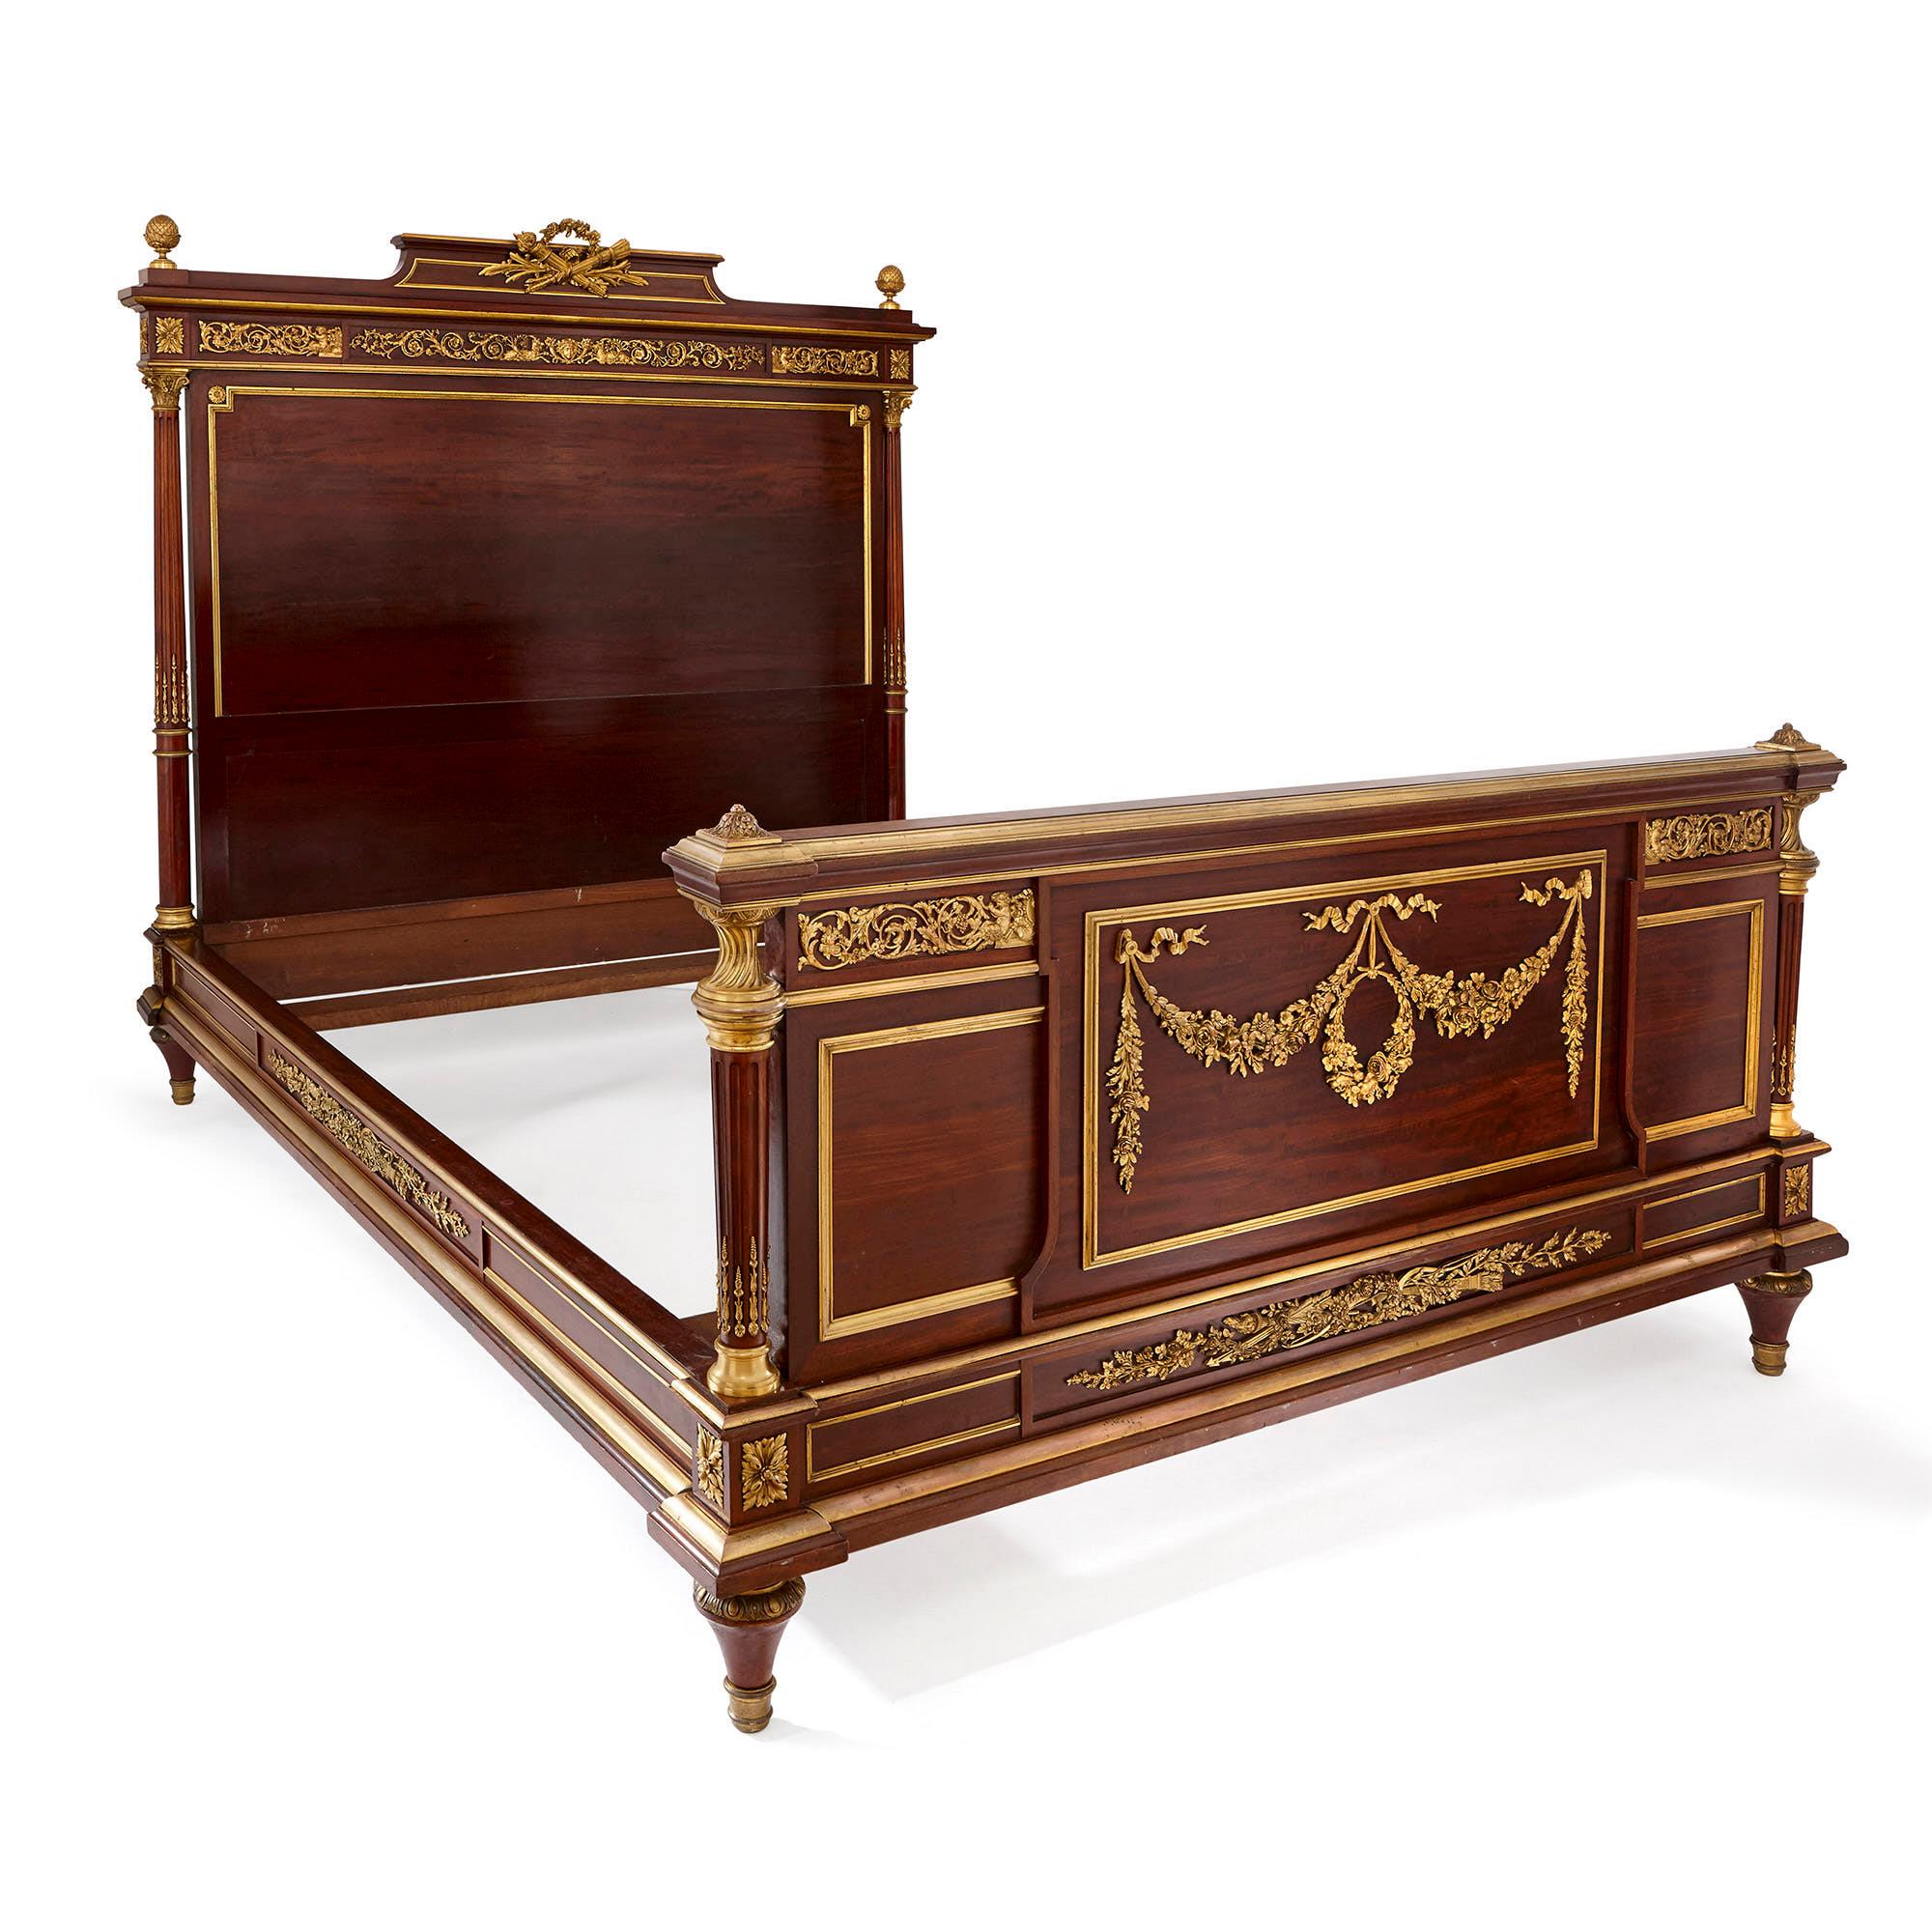 This beautiful bed is crafted from rich, warm-colored mahogany wood and elegantly decorated with gilt bronze (ormolu) mounts. In its style, this bed is inspired by furniture design of the French Louis XVI period (1774-1793). 

The bed is composed